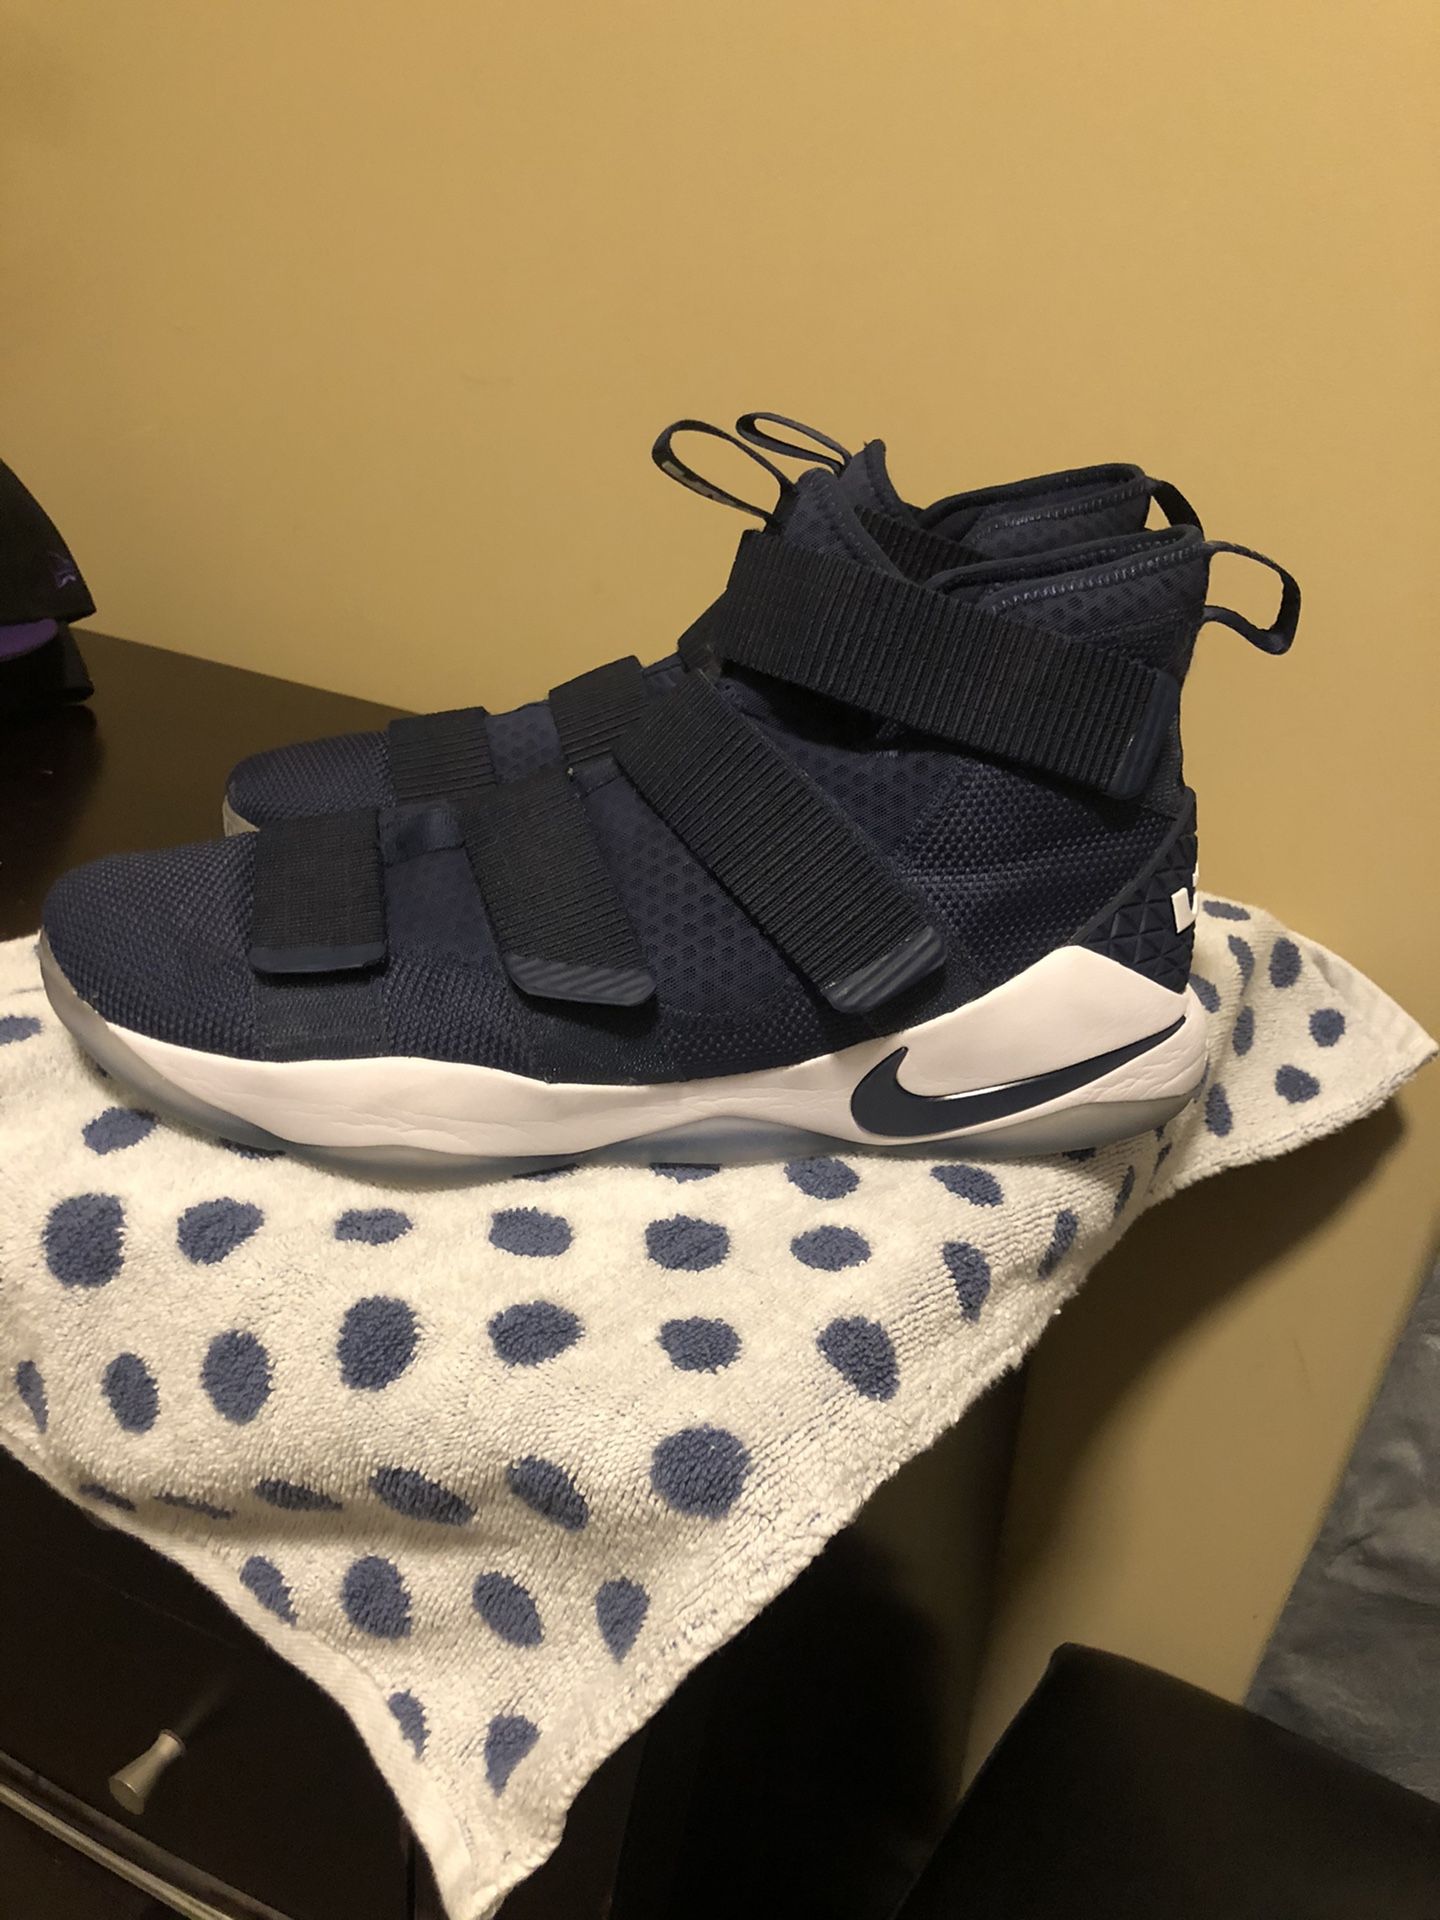 Nike Lebron Soldier XI 11 Shoes